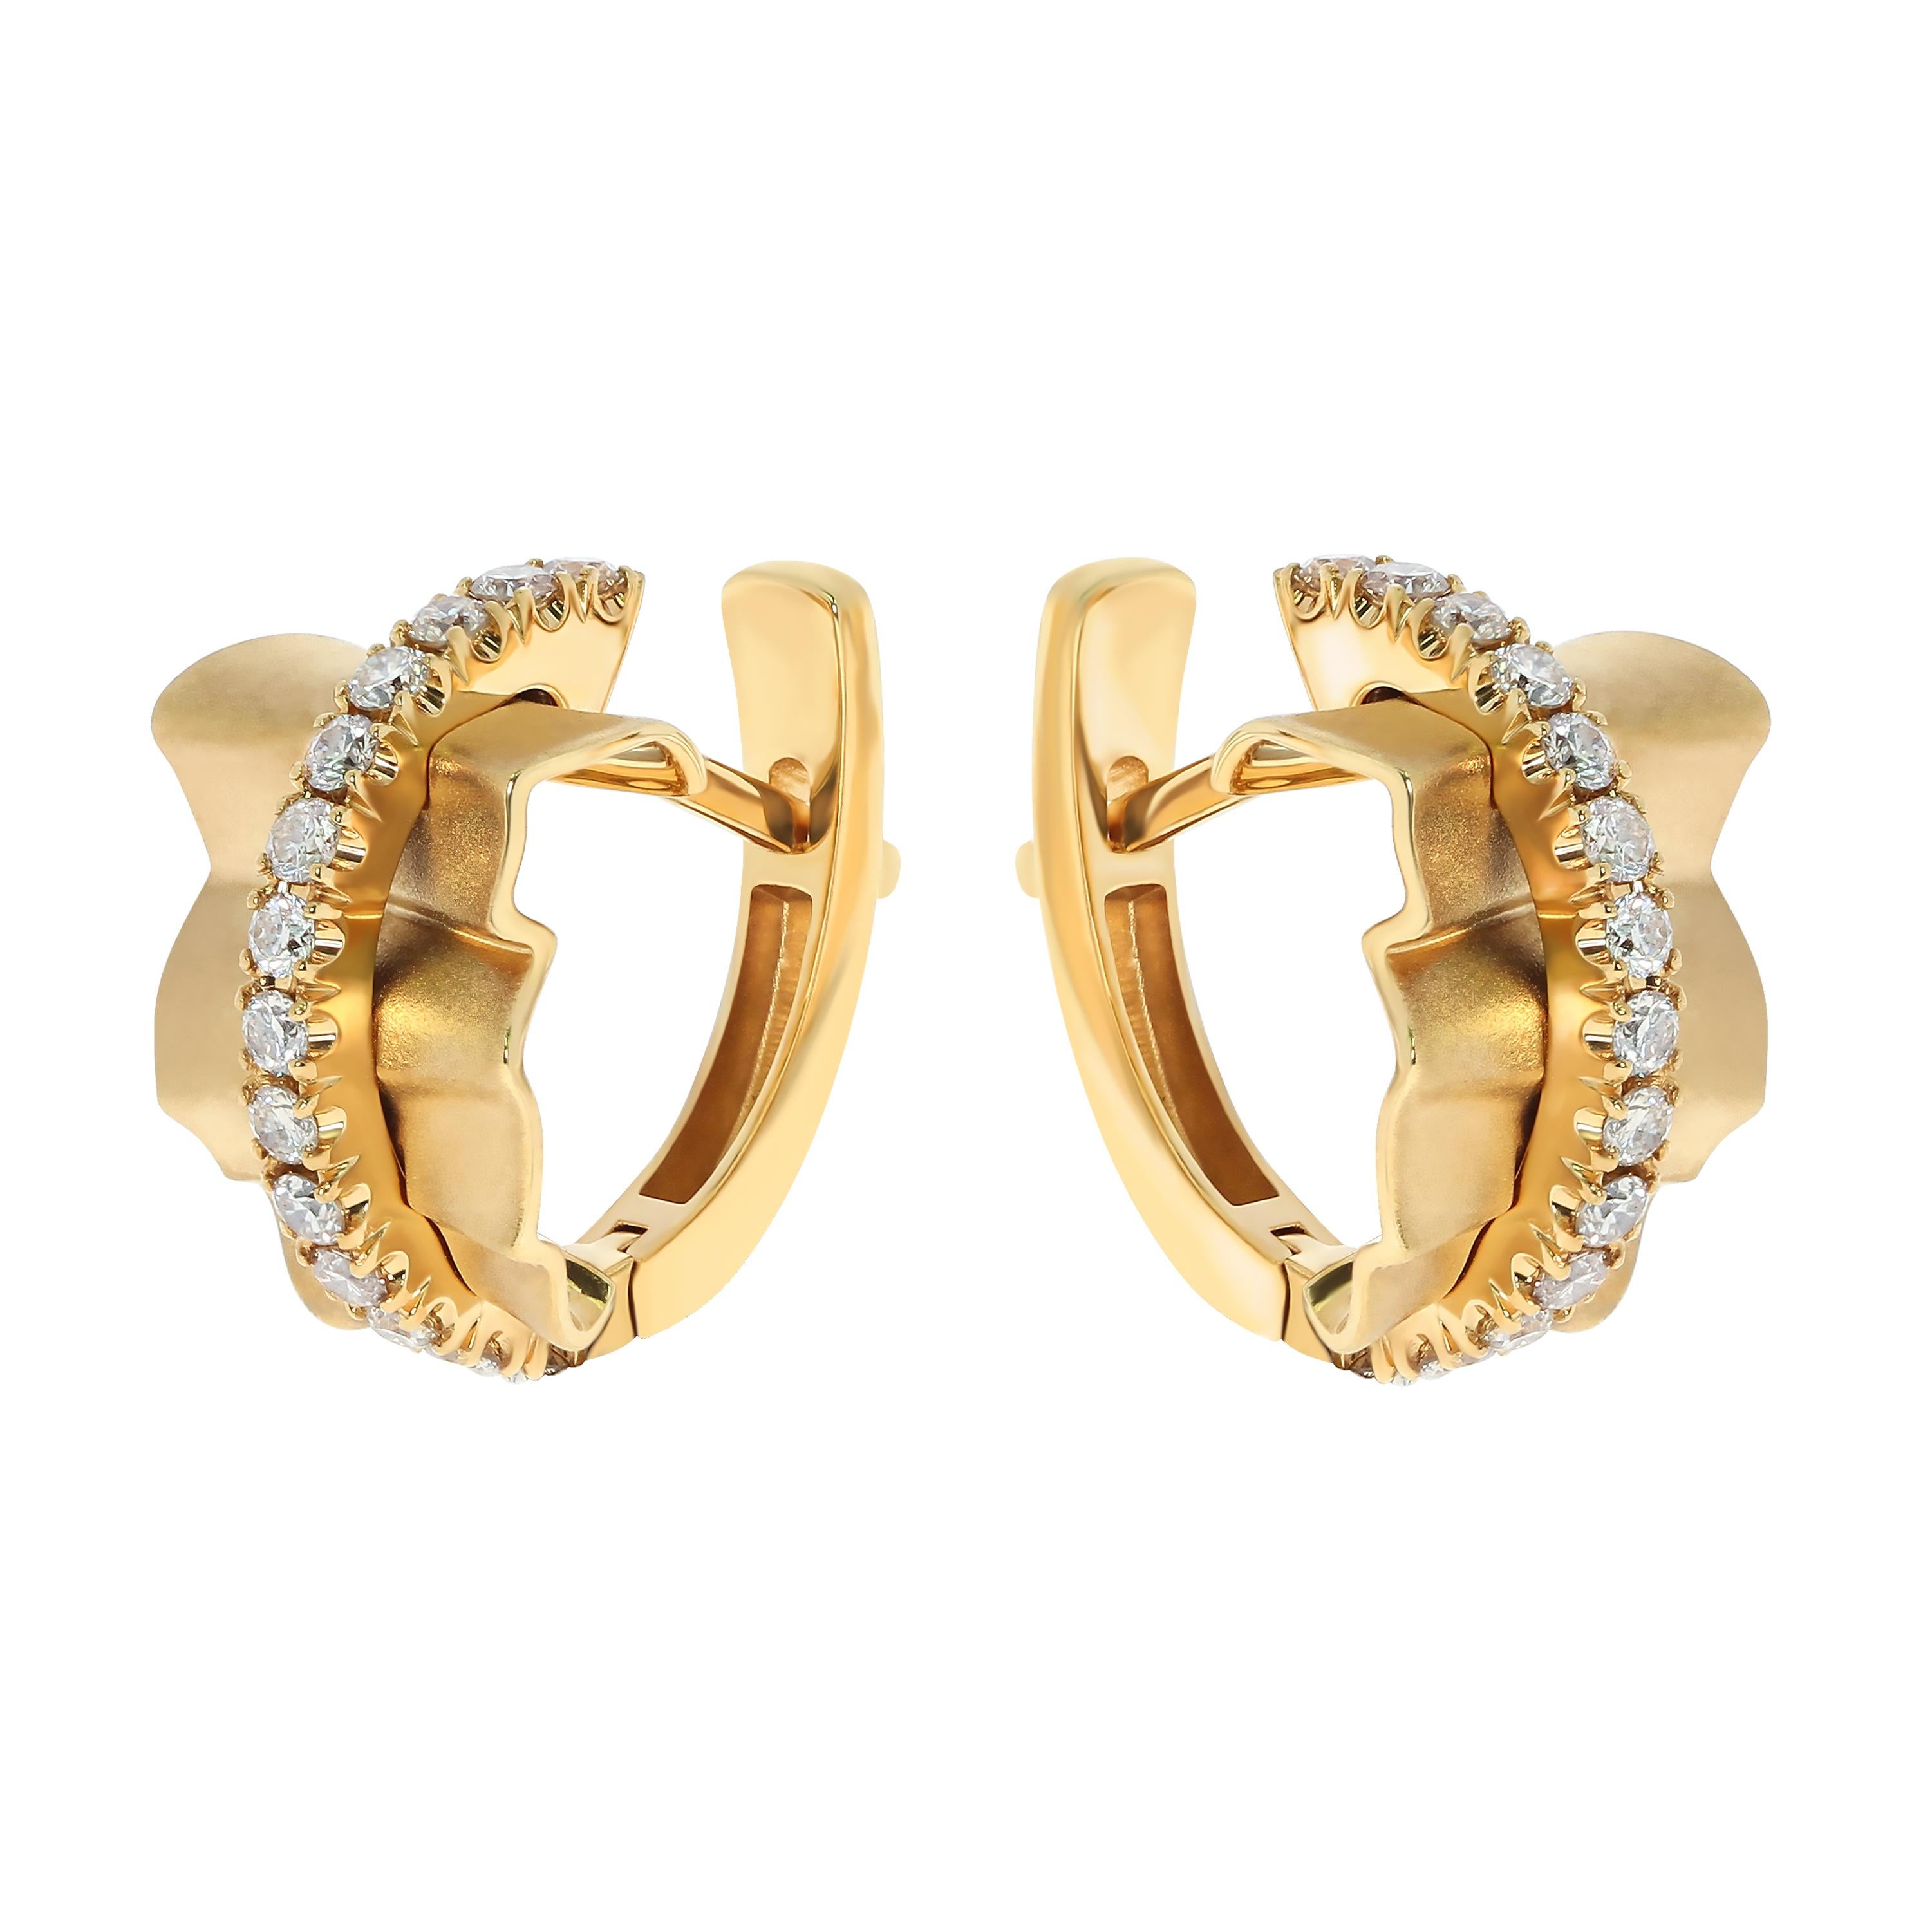 Champagne Diamonds 18 Karat Yellow Gold Pret-a-Porter Earrings
Earrings from Pret-a-Porter collection are the elegance of fabrics. These Earring are made as if of silk, which is pretty crumpled under the pressure of shiny 28 Champagne Diamonds.